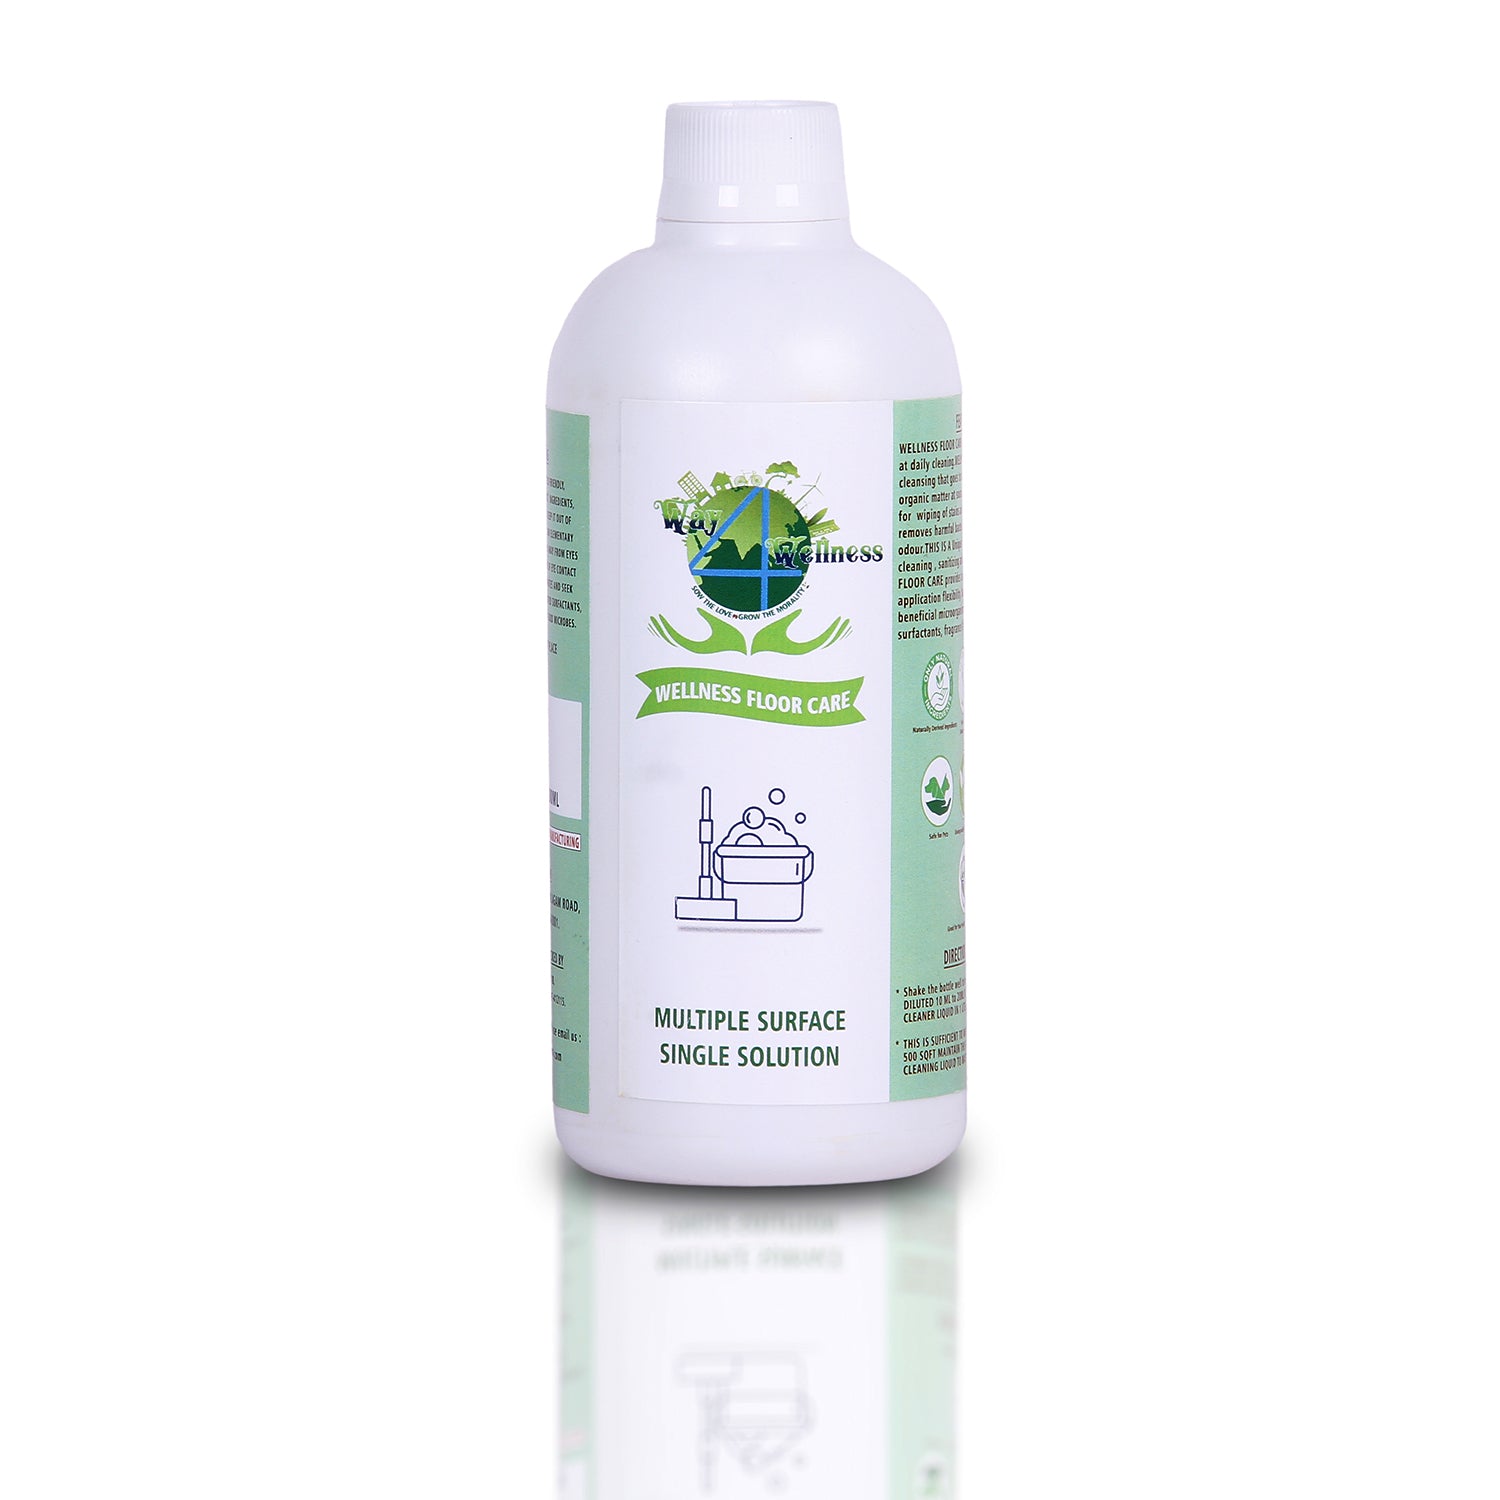 Wellness Natural Floor Care -  Natural Plant Based Multiple Surface/Floor Cleaning Liquid | Eco-Friendly, Non-Toxic Cleaning liquid, Biodegradable   - 500ML